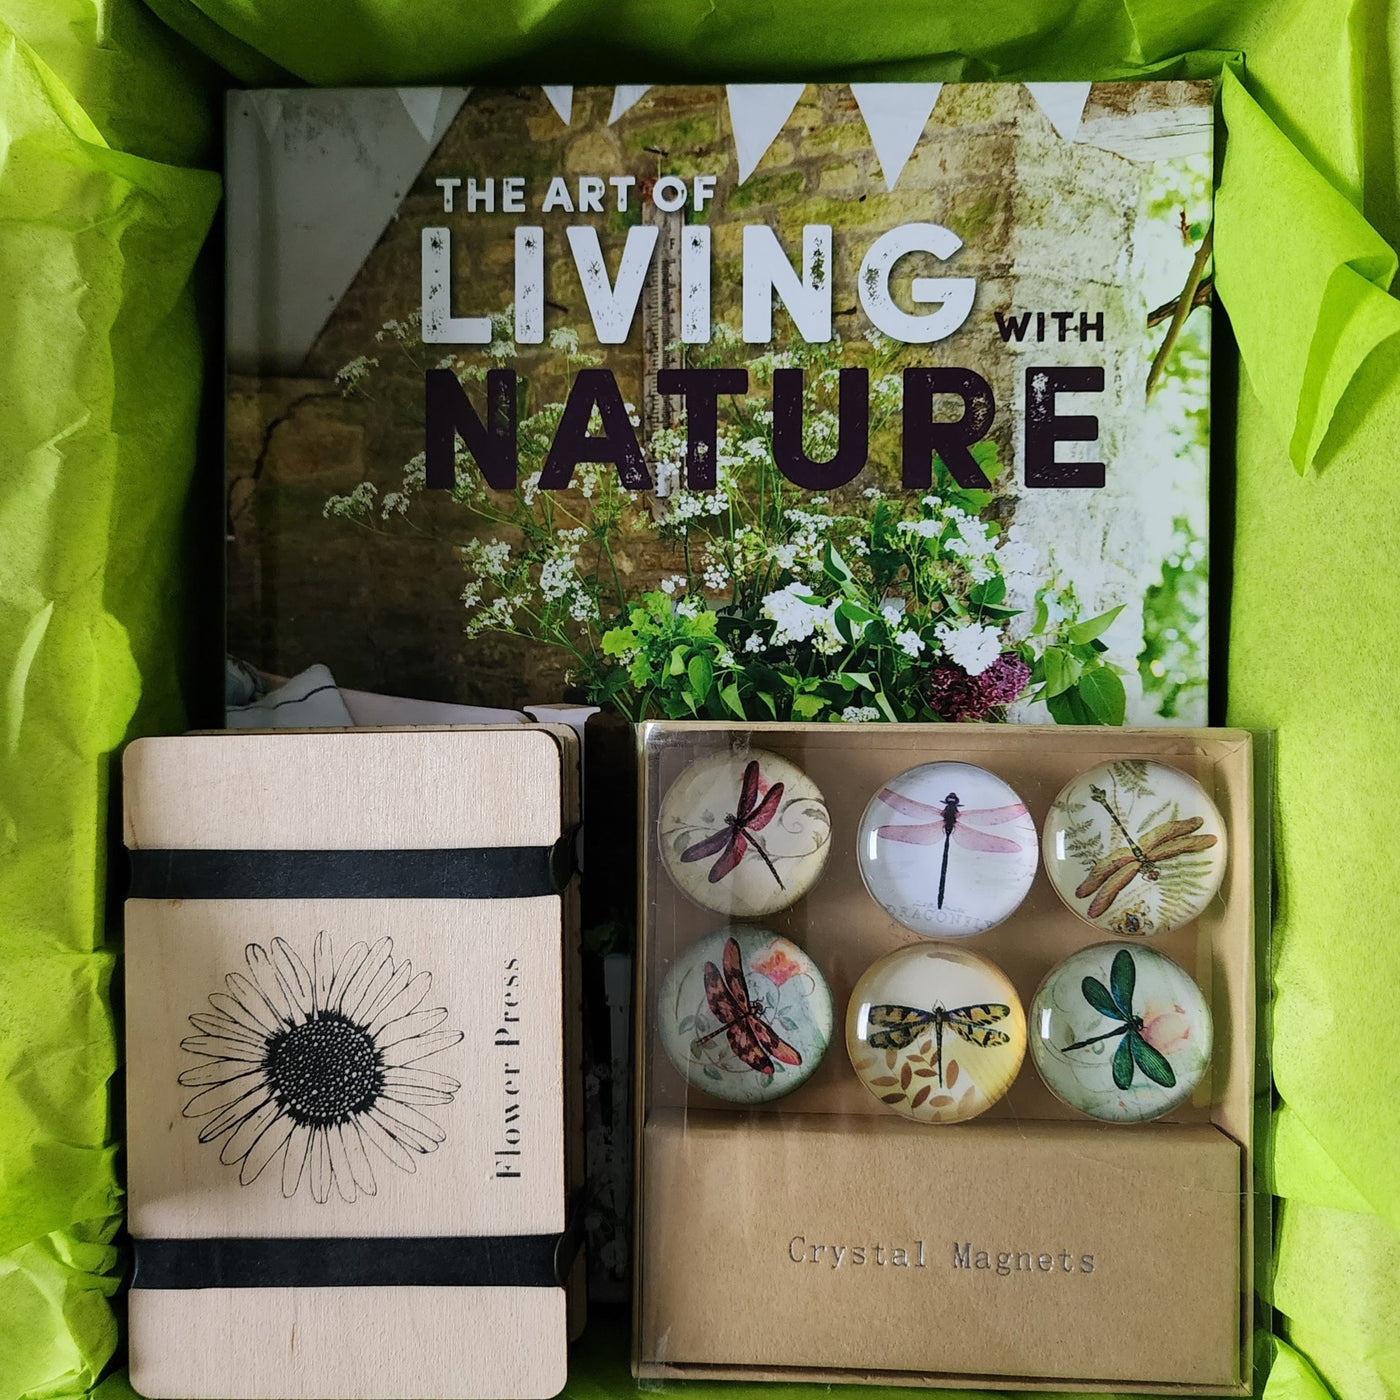 living with nature book, flower press and crystal magnets set